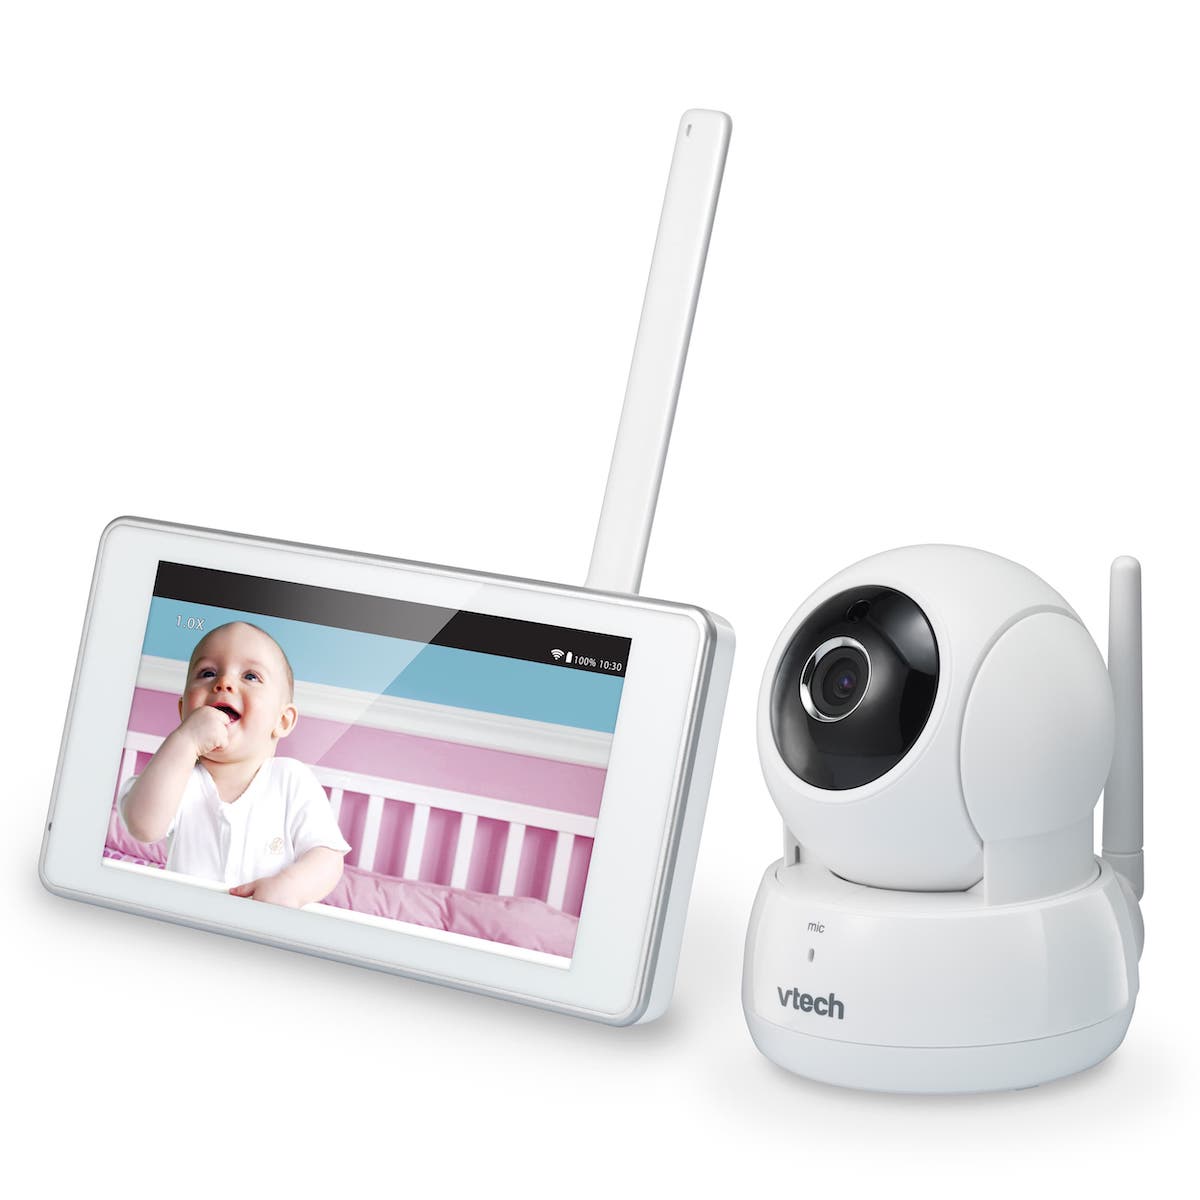 does cloud baby monitor have night vision